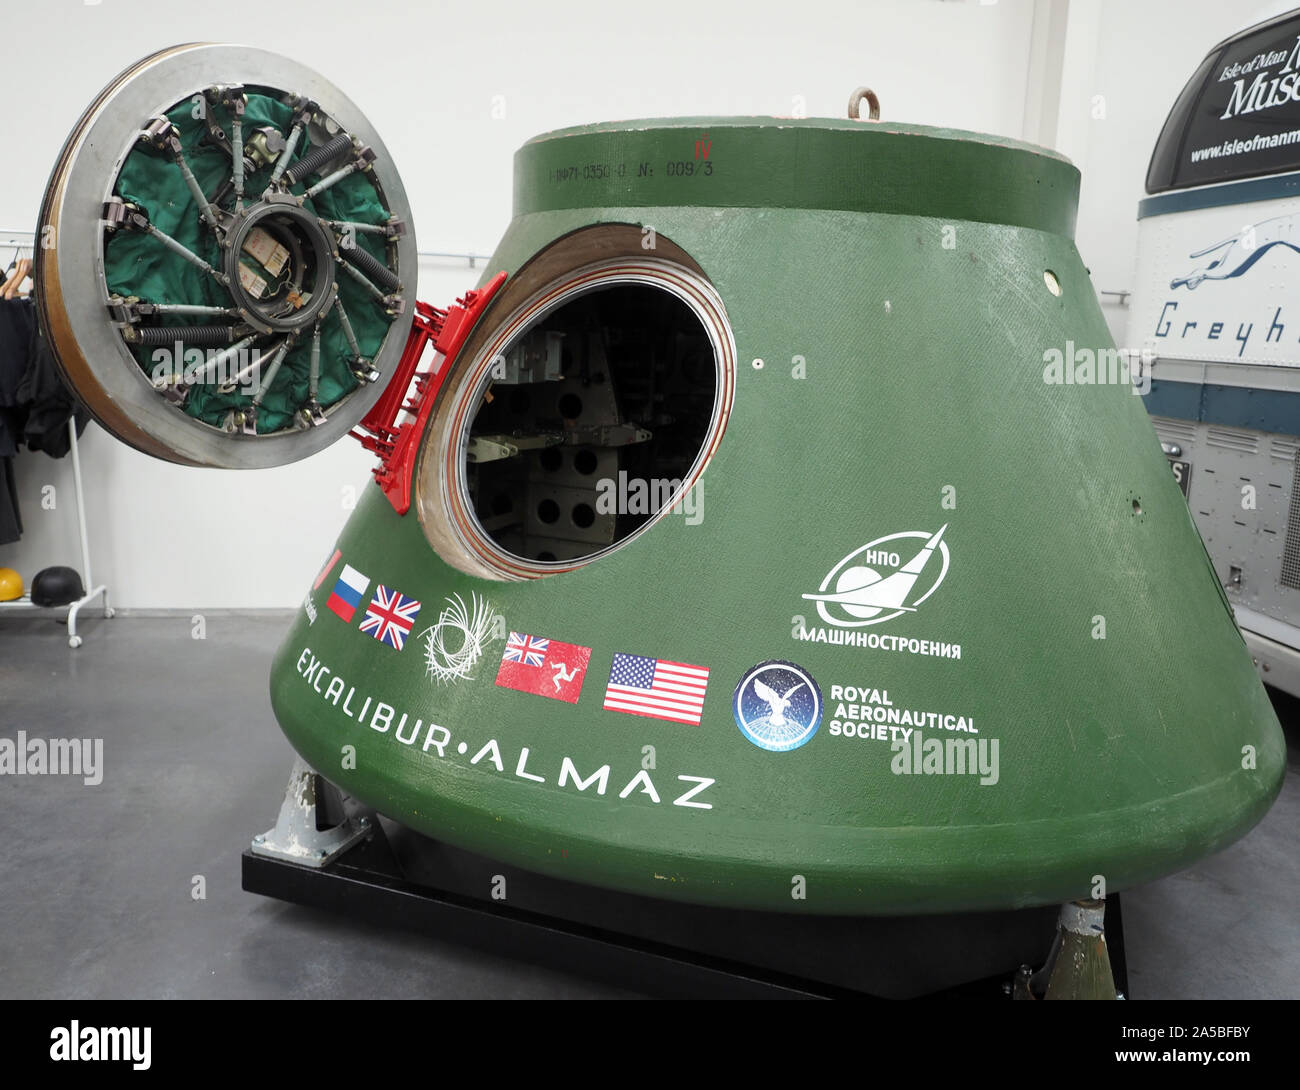 The Excalibur Almaz space capsule that it was hoped could take tourists into space. The Isle of Man Motor Museum Stock Photo